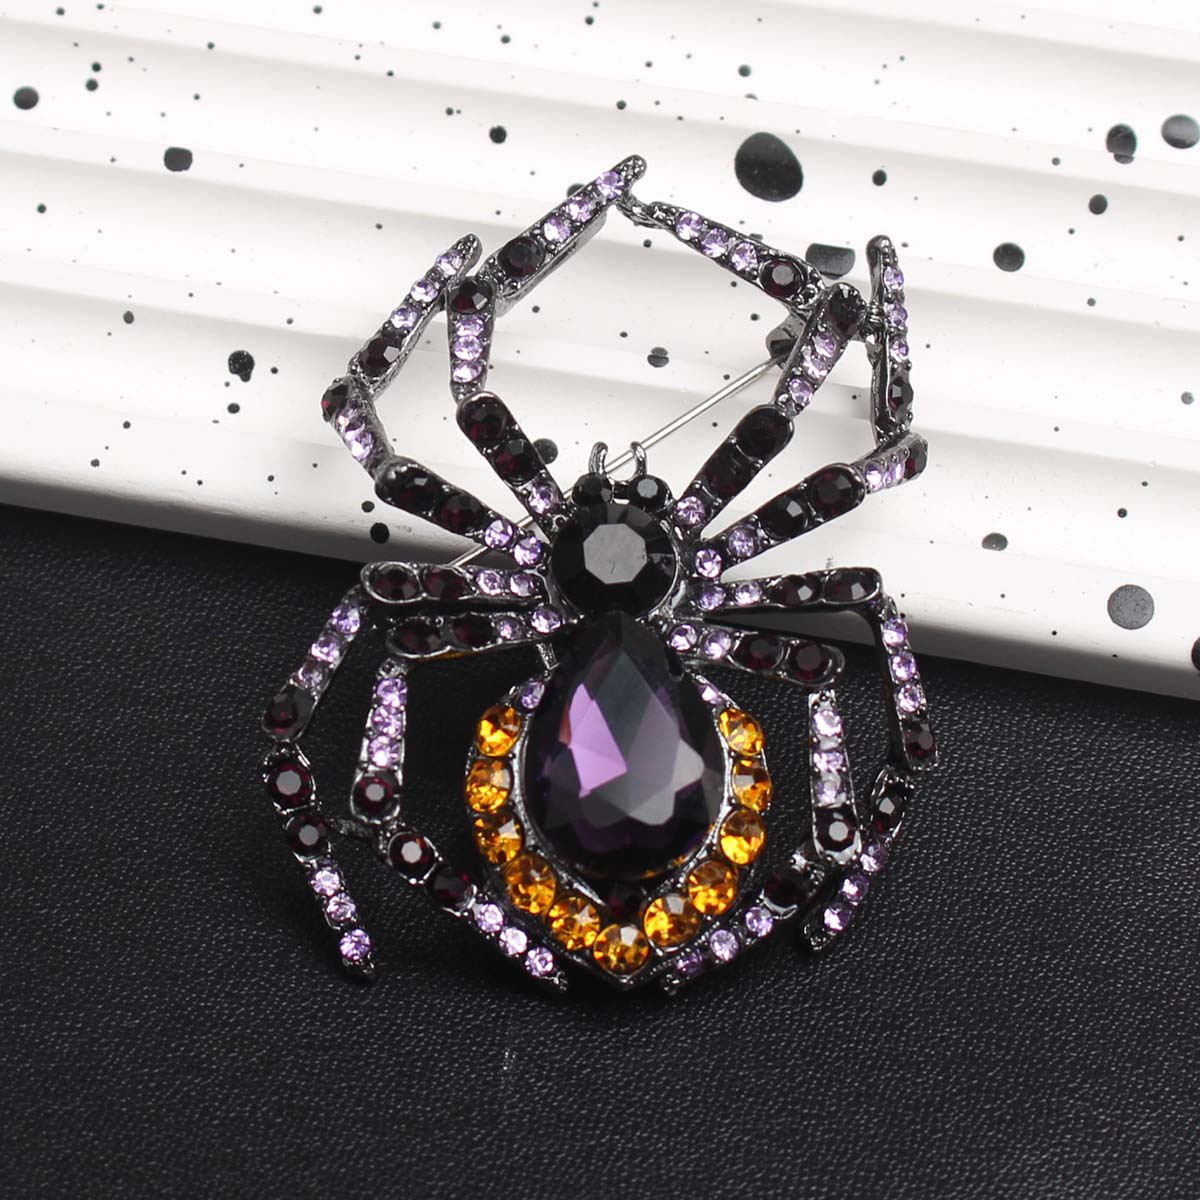 

Bohemian Luxury Style Spider Brooch, Exaggerated Halloween Rhinestone Insect Pin, Personalized Fashion Accessory For Clothing